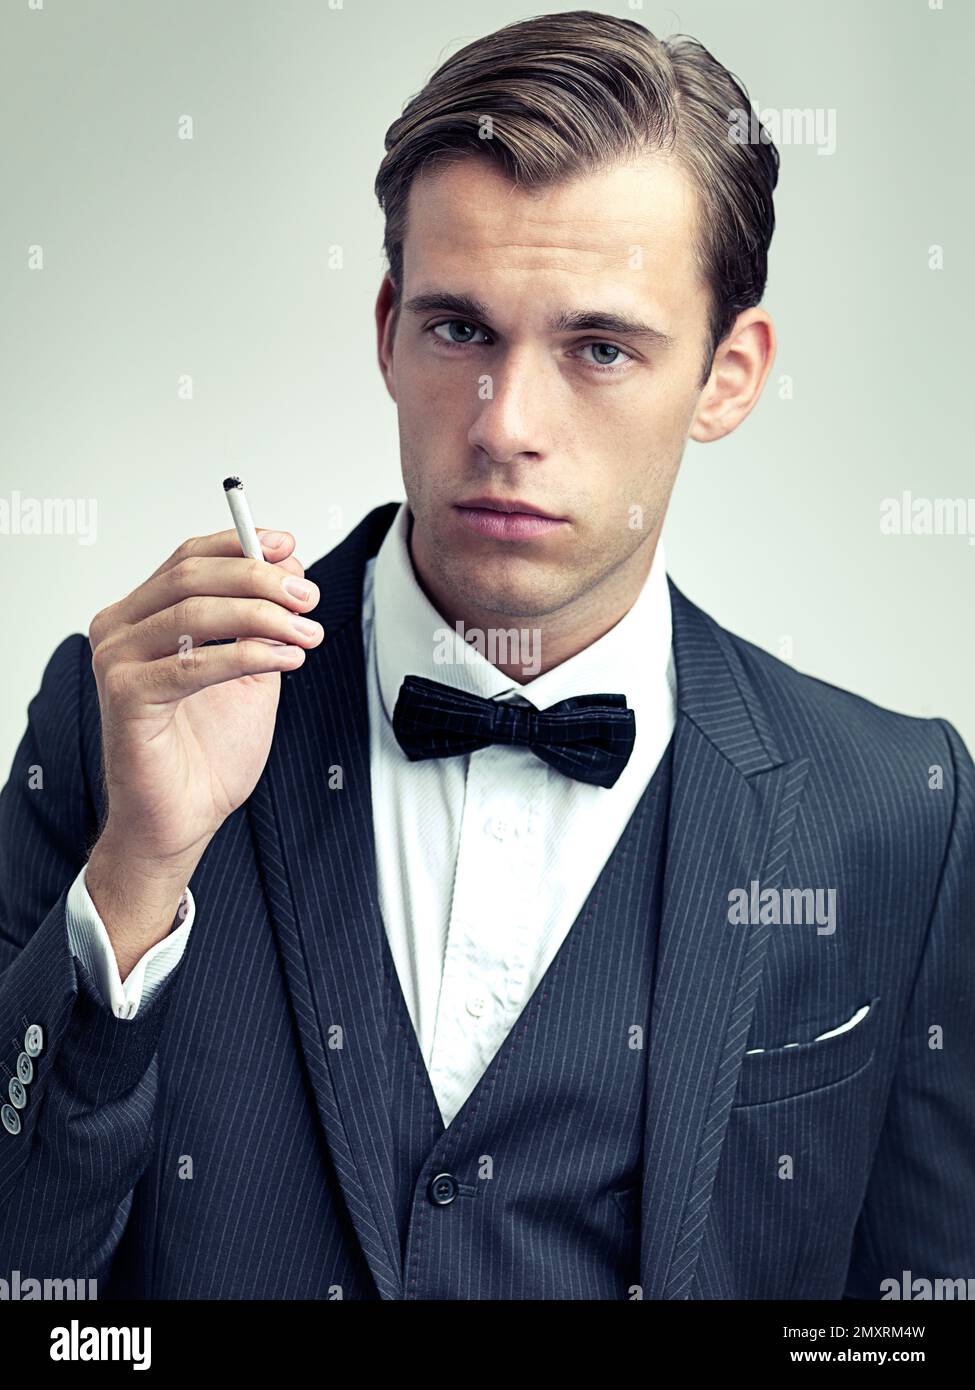 Cigarette. A cropped portrait of a confident young gentleman smoking a cigarette. Stock Photo